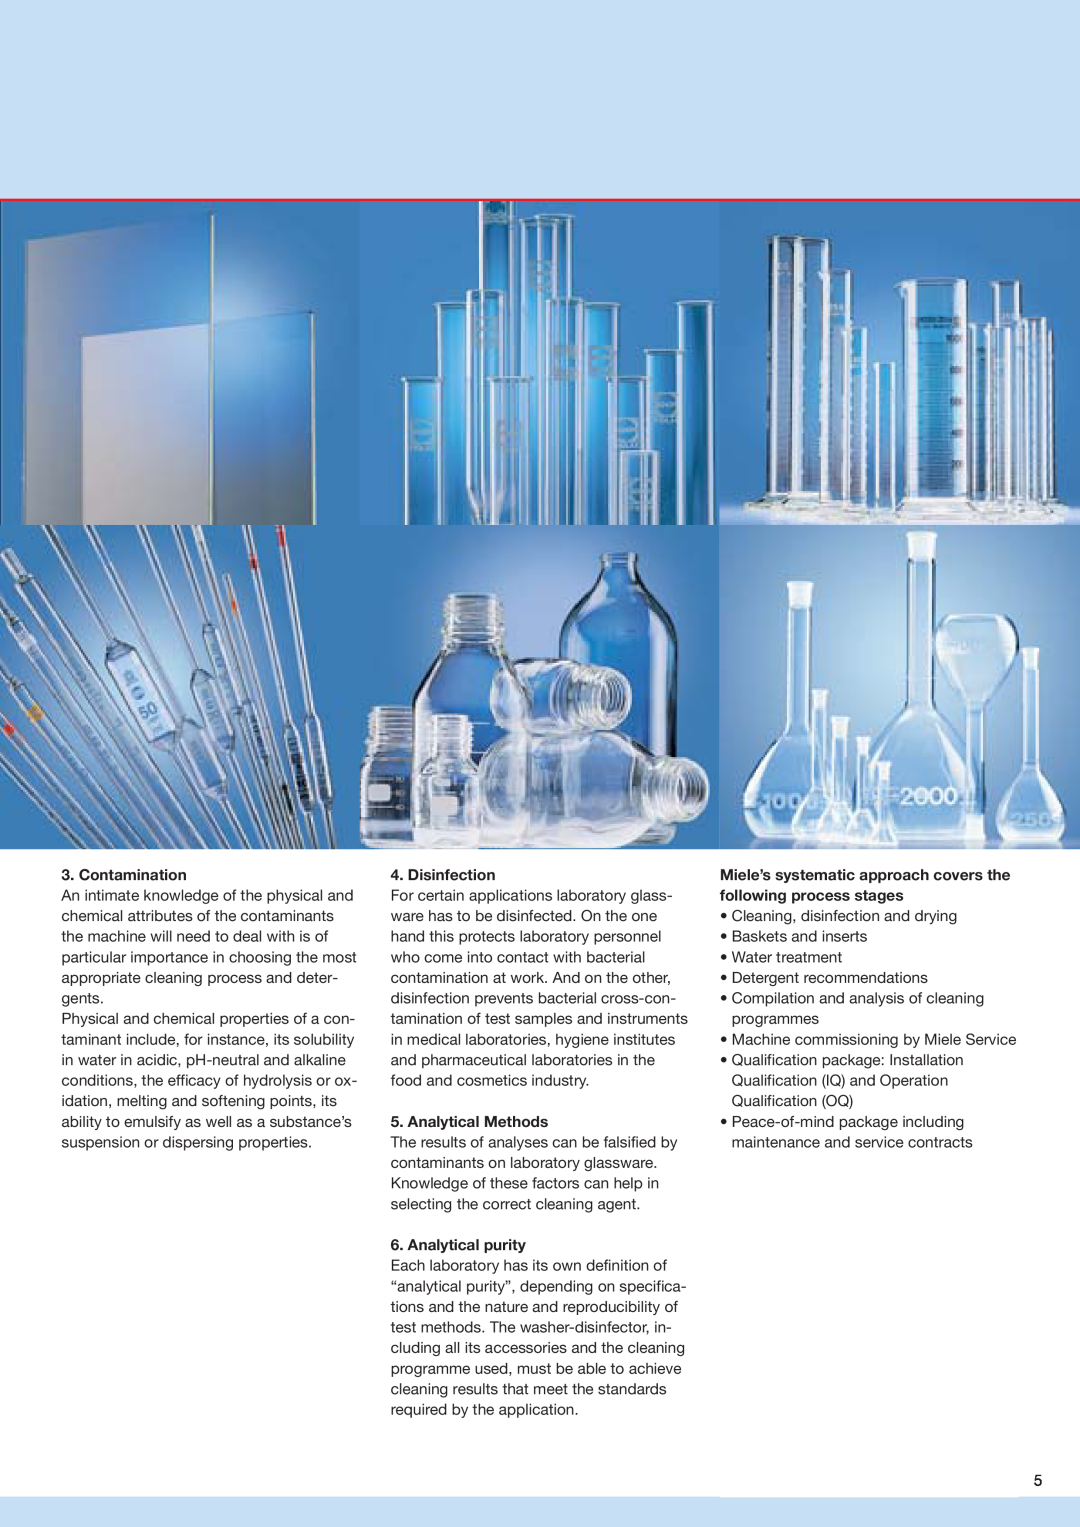 Miele G 7836, G 7883 manual Contamination, Disinfection, Analytical Methods, Analytical purity 